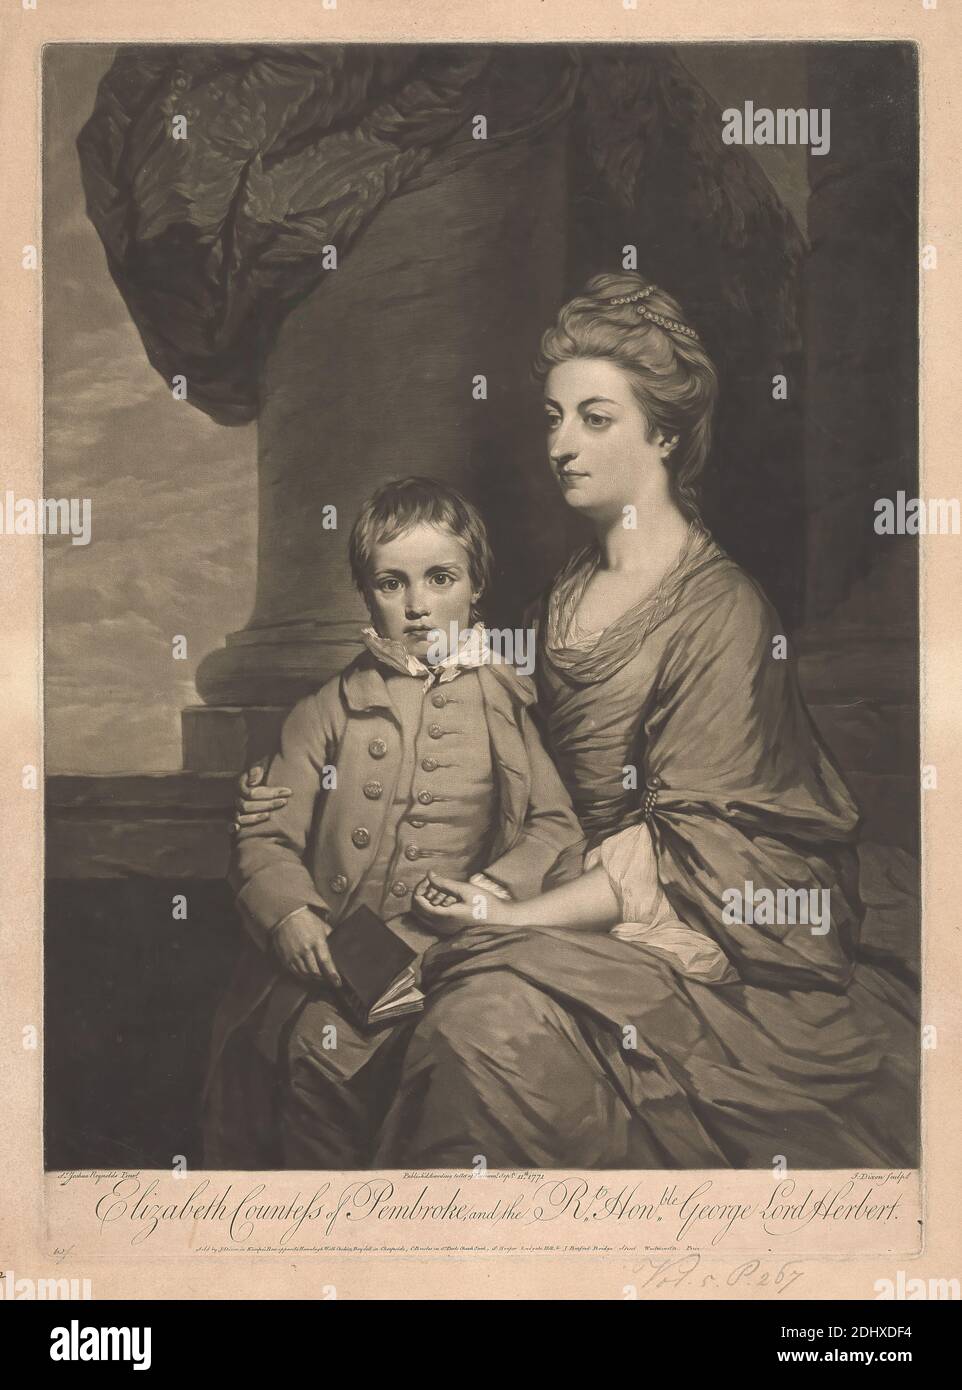 Elizabeth, Countess of Pembroke and Montgomery, with Her Son, Honorable, George, Lord Herbert, John Dixon, ca. 1740–1811, Irish, after Sir Joshua Reynolds RA, 1723–1792, British, 1771, Mezzotint on moderately thick, moderately textured, beige, laid paper, Sheet: 19 3/8 × 14 3/8 inches (49.2 × 36.5 cm), Plate: 17 15/16 × 12 15/16 inches (45.6 × 32.9 cm), and Image: 16 5/8 × 12 7/8 inches (42.2 × 32.7 cm Stock Photo